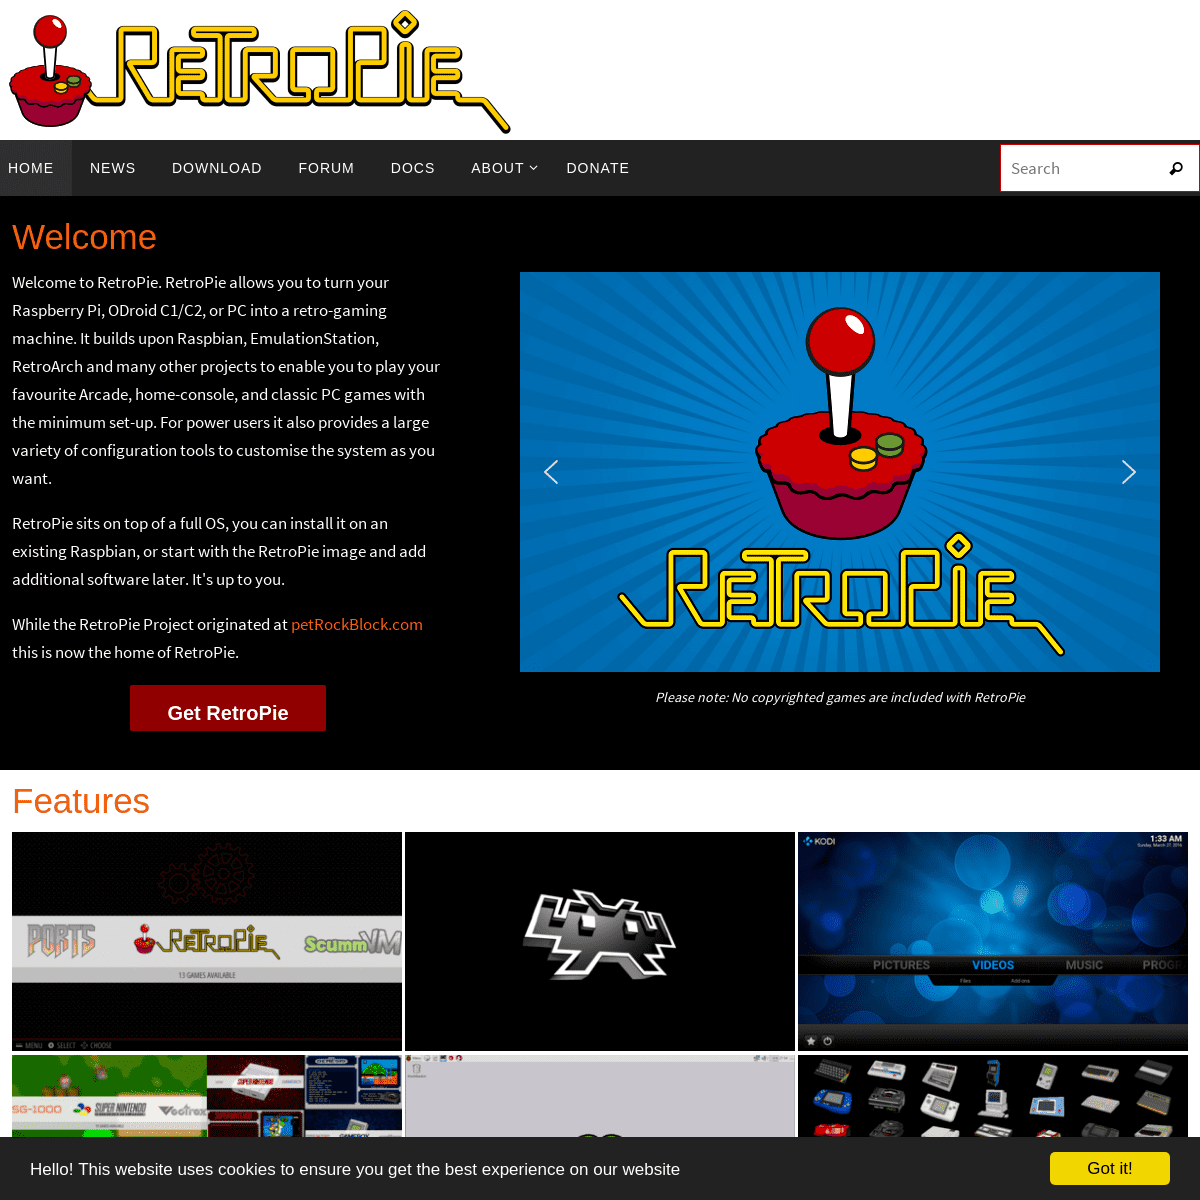 A complete backup of retropie.org.uk